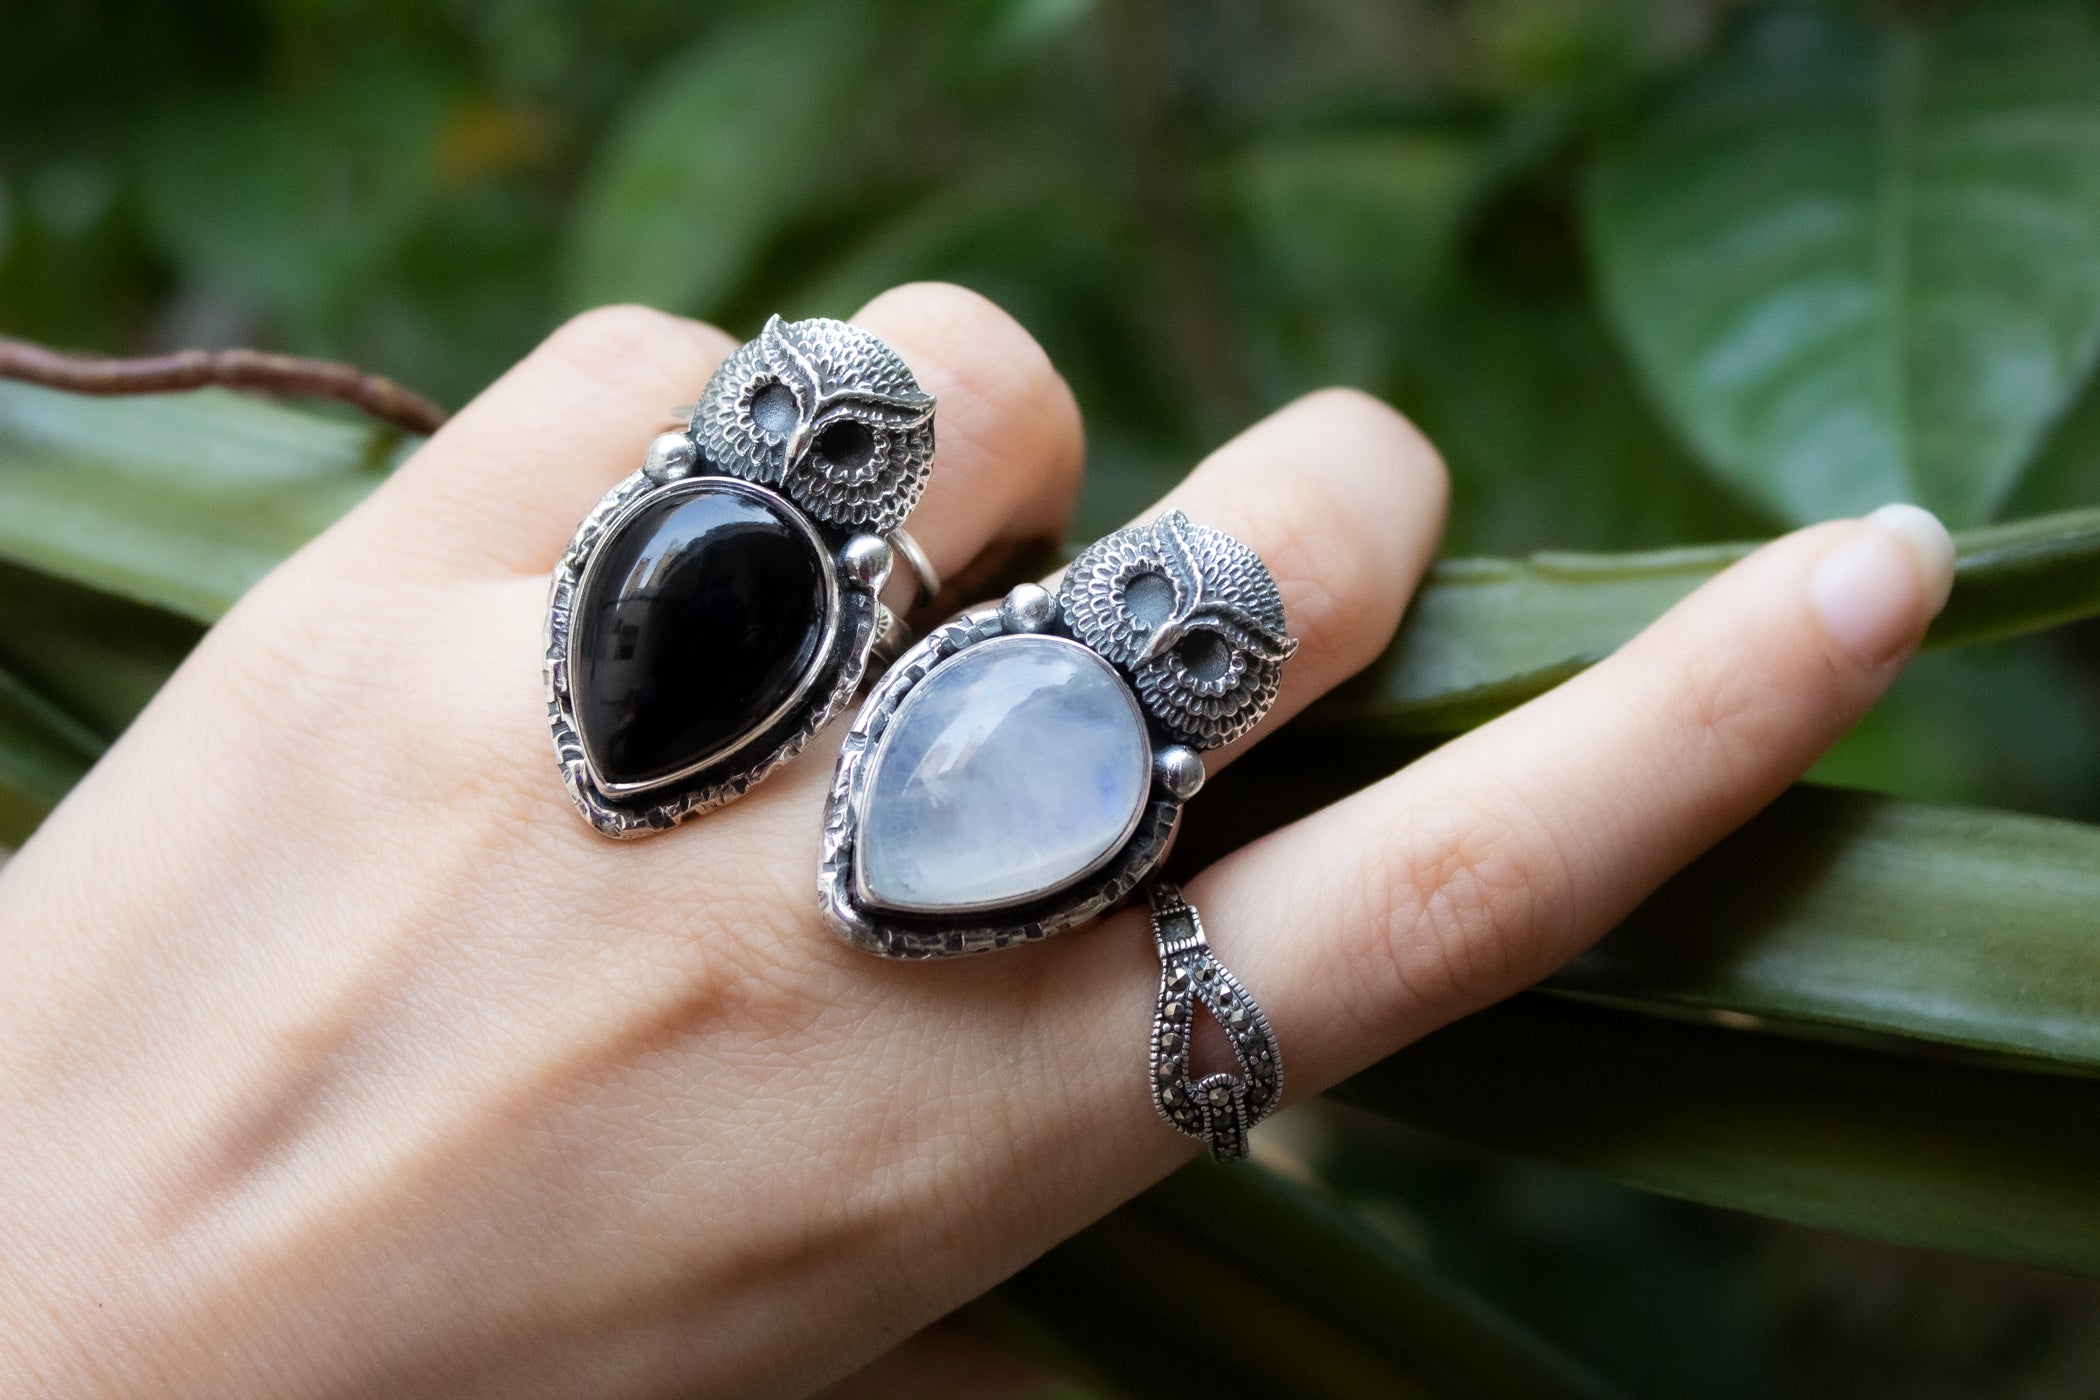 Moonstone Ring with Owl Sterling Silver Ring, AR-6677 – Its Ambra